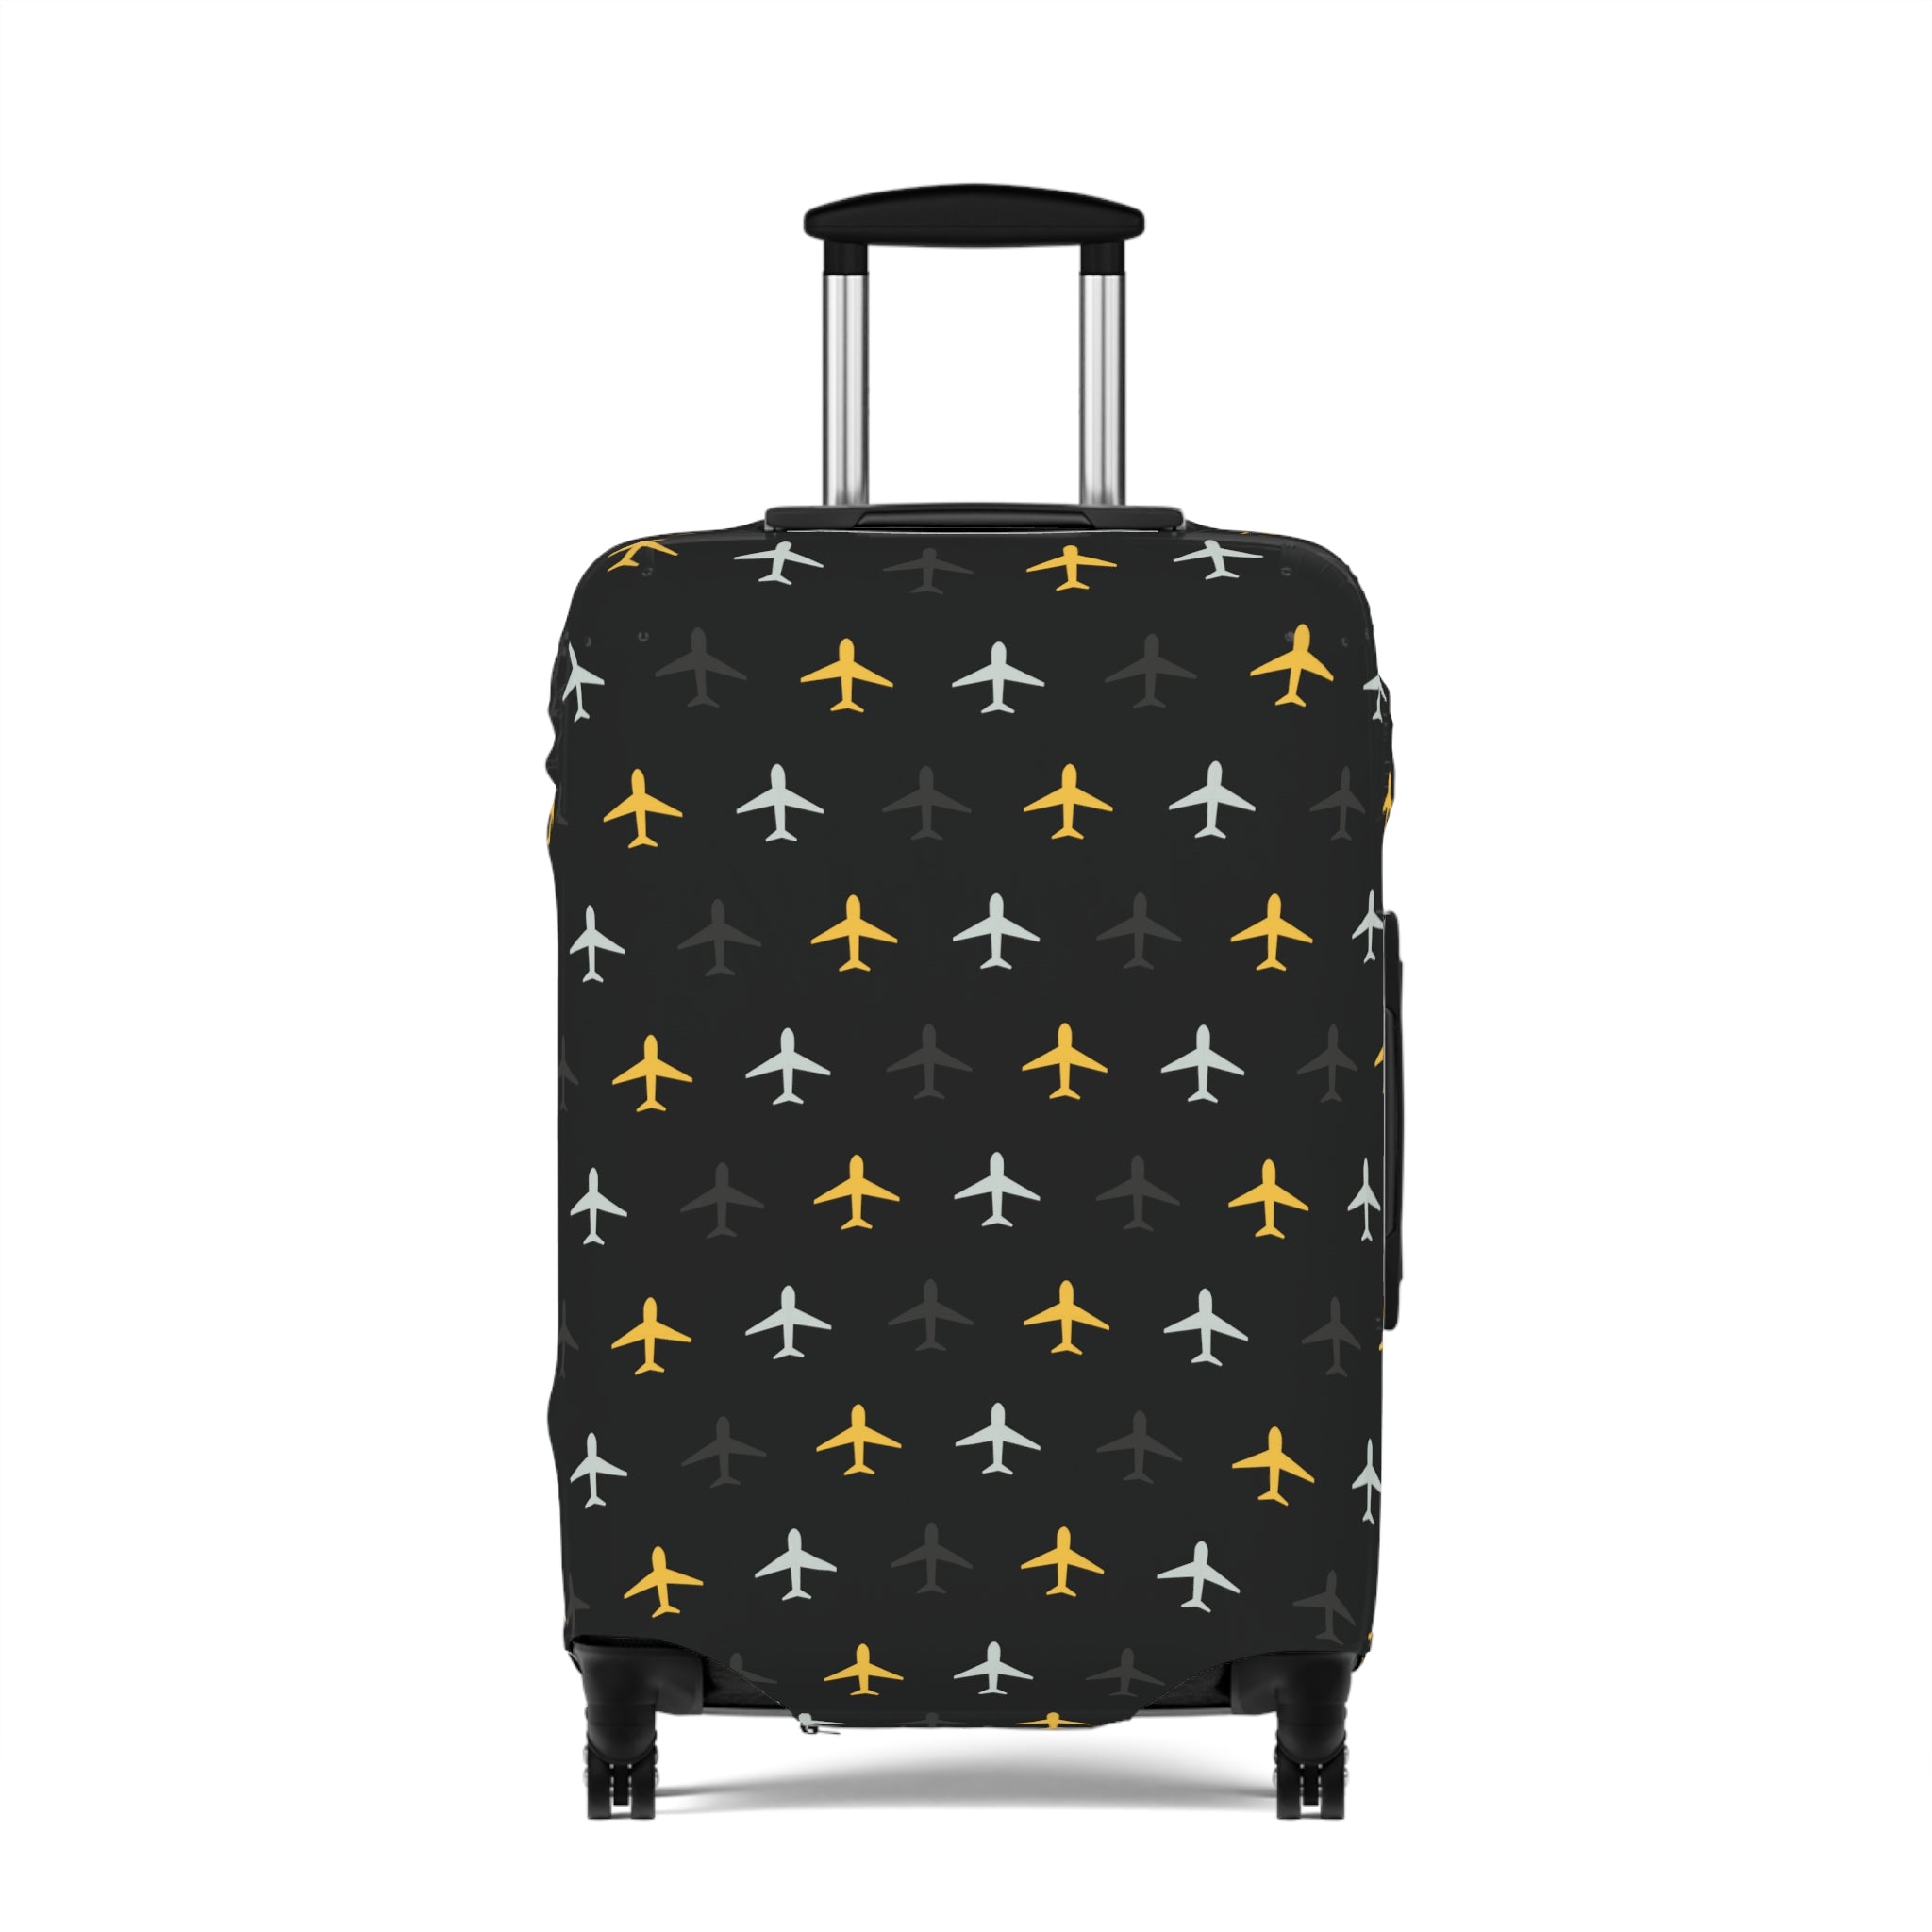 Planes Luggage Cover (Black)